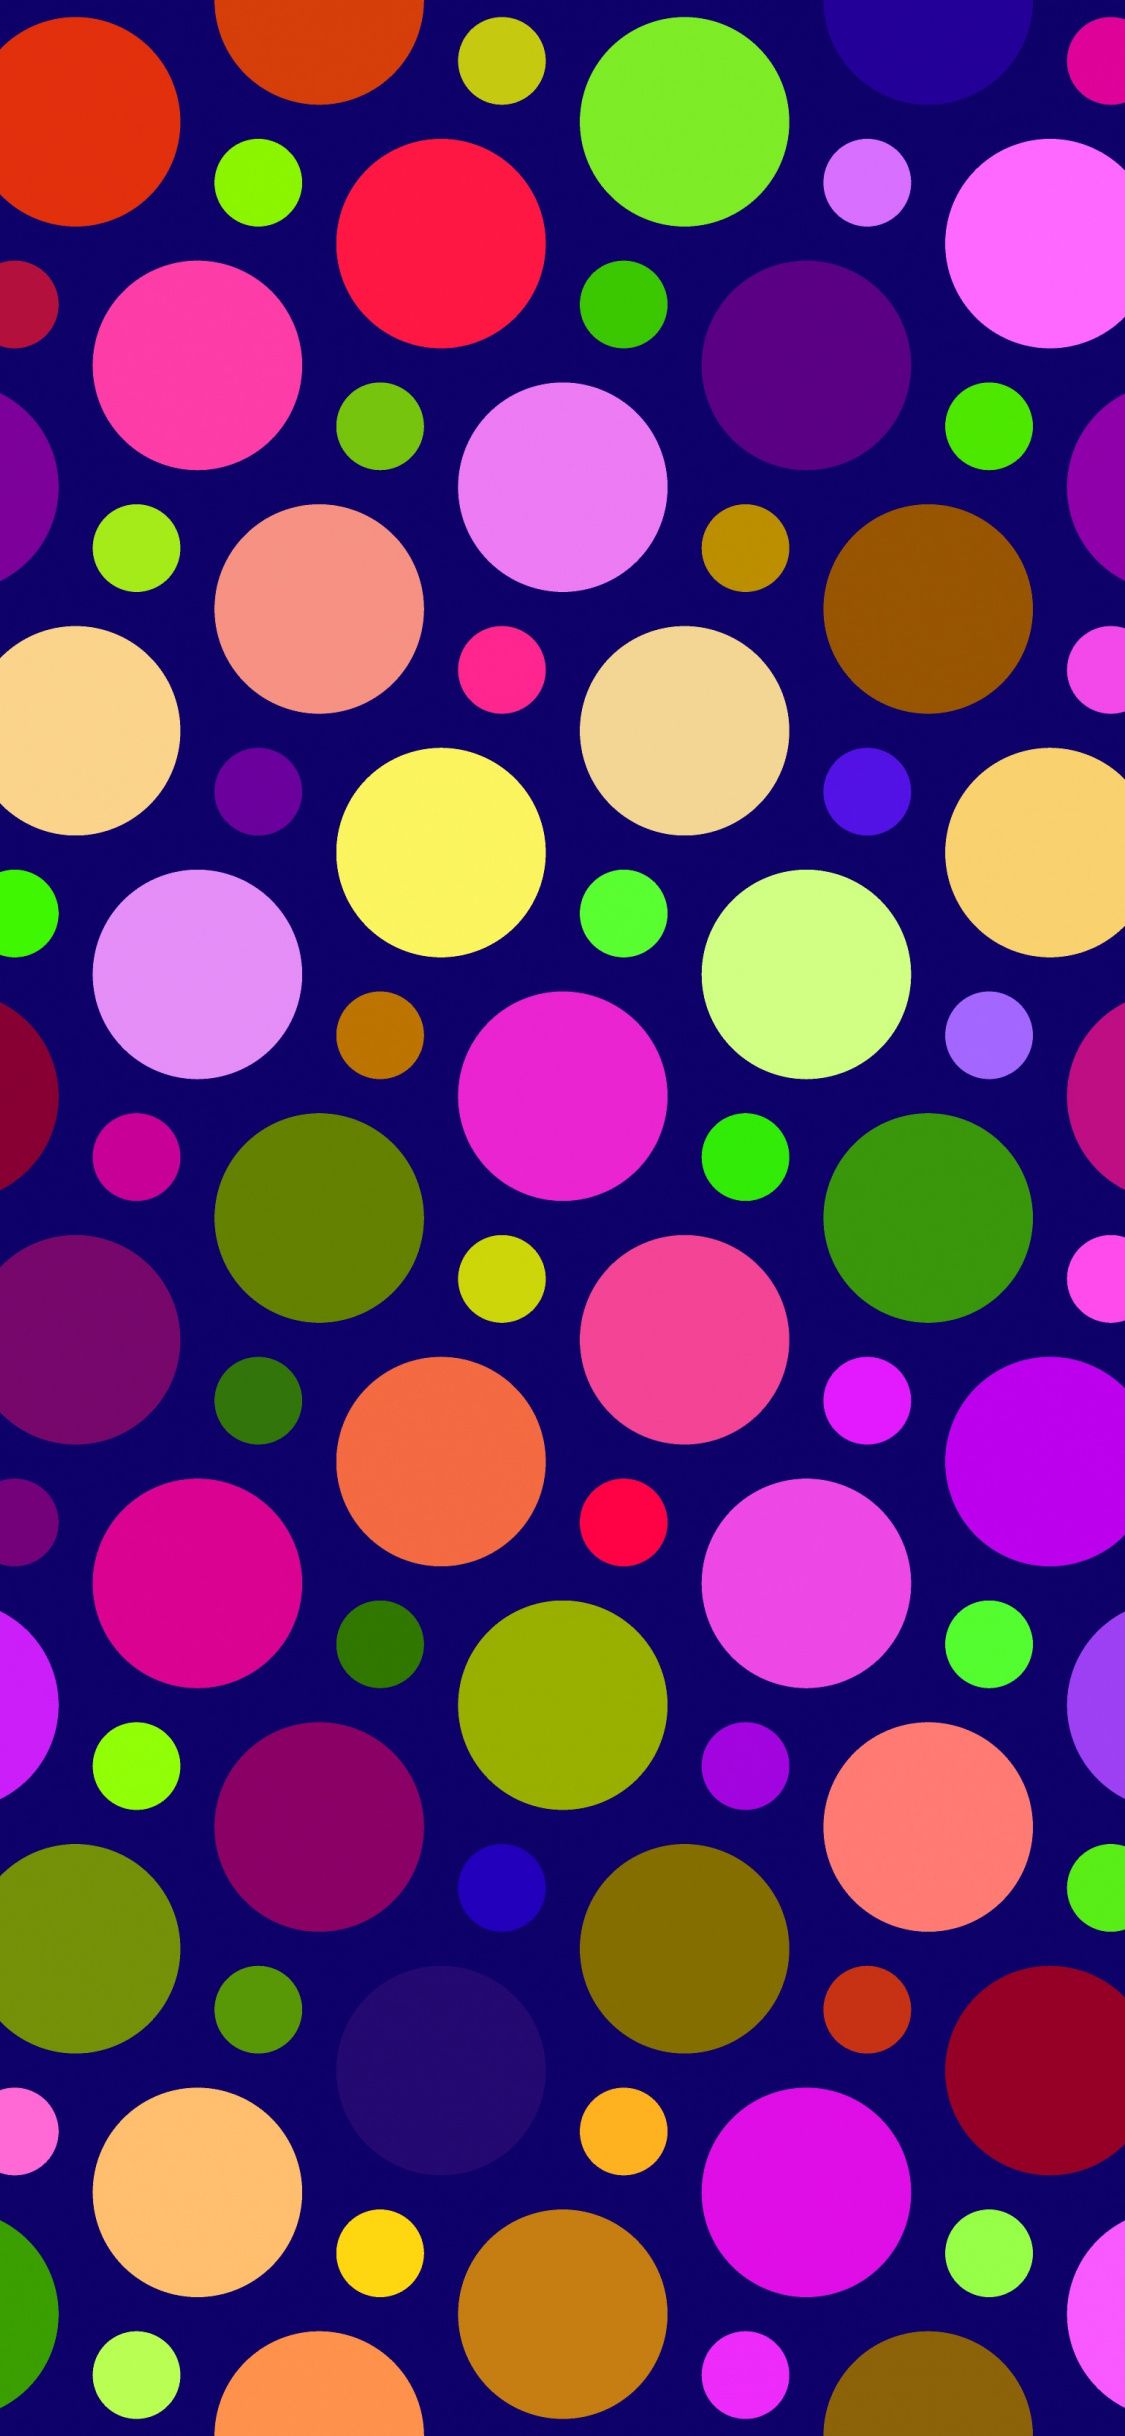 Download 1152x864 wallpaper Texture, colorful, circles, abstract, iPhone X 1125x2436 HD image, backgr. Colorful wallpaper, Polka dots wallpaper, Bubbles wallpaper